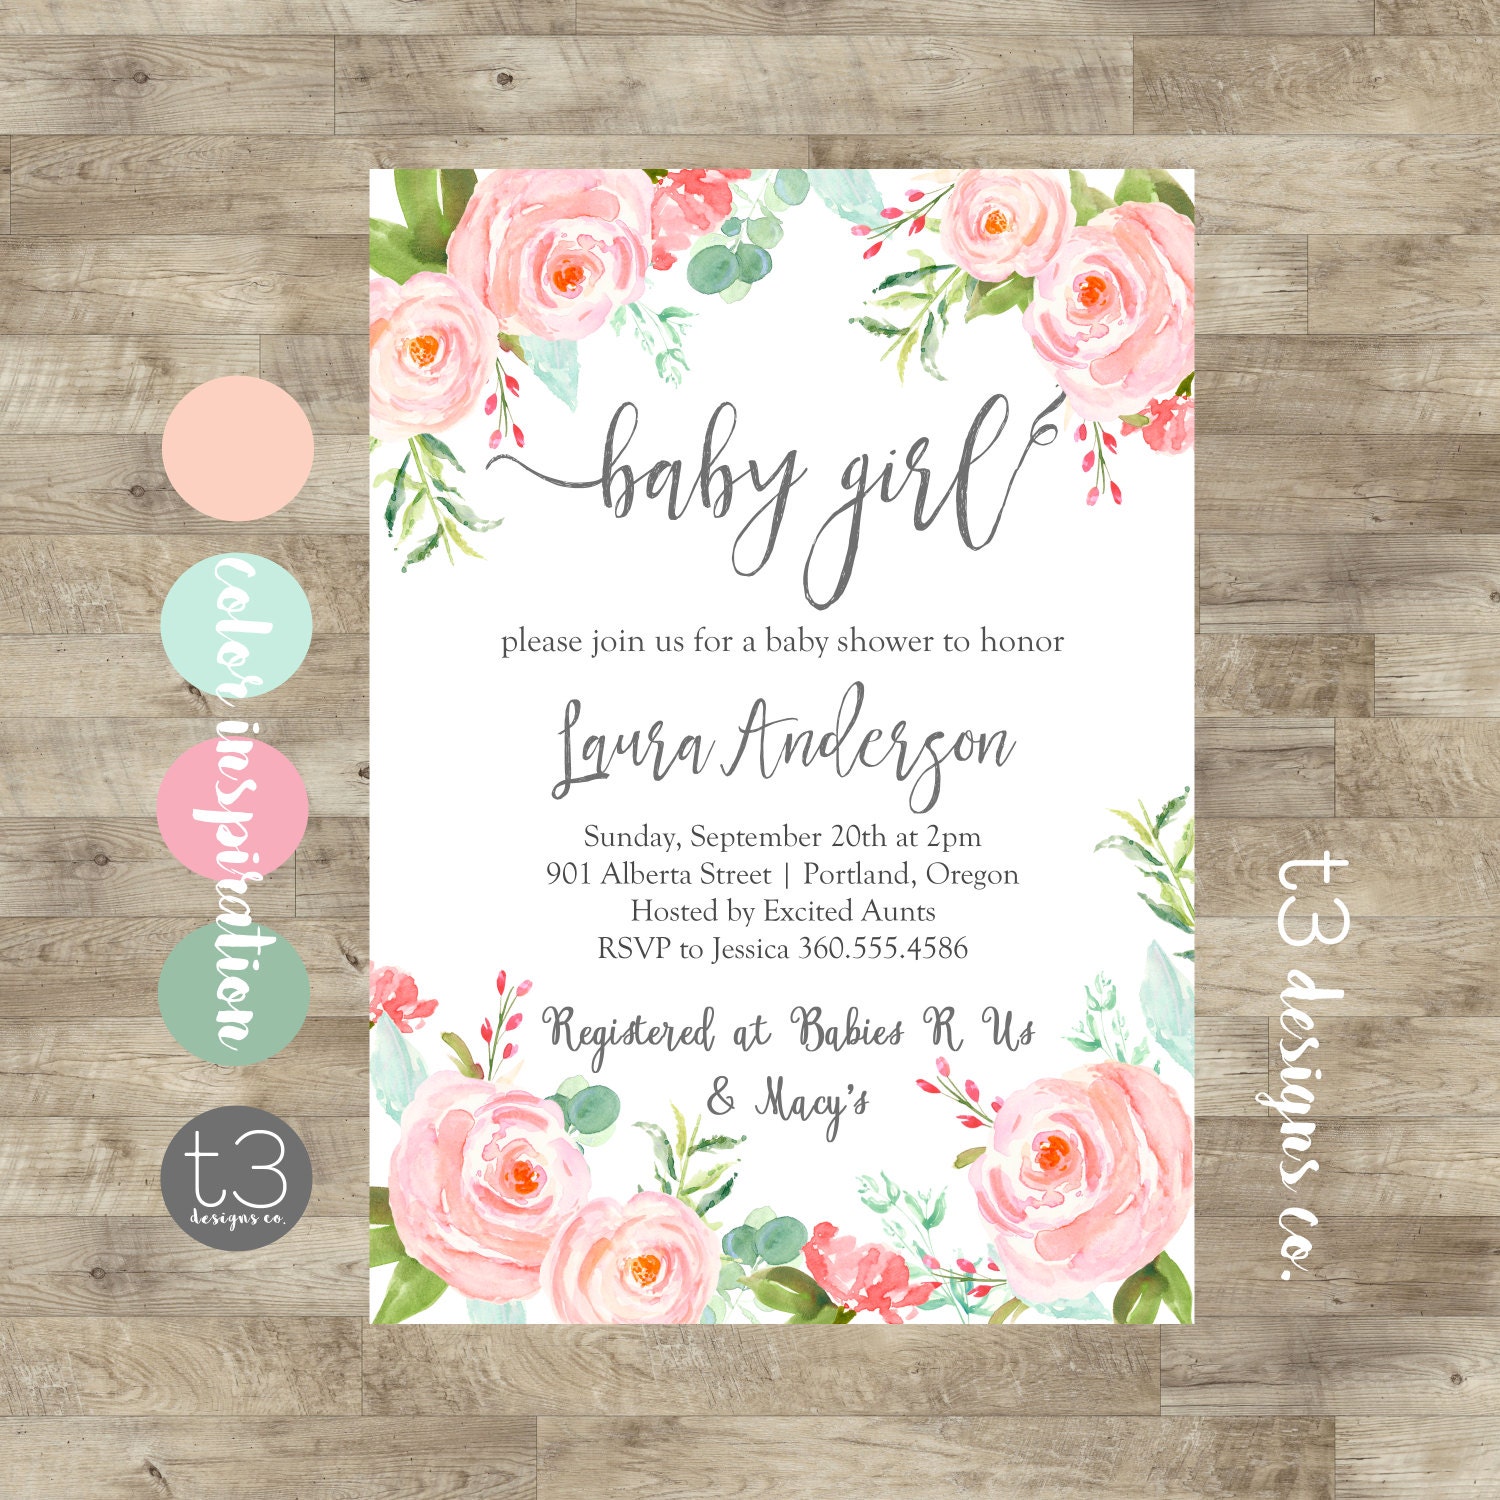 best-20-baby-girl-invitations-ideas-on-pinterest-unique-baby-shower